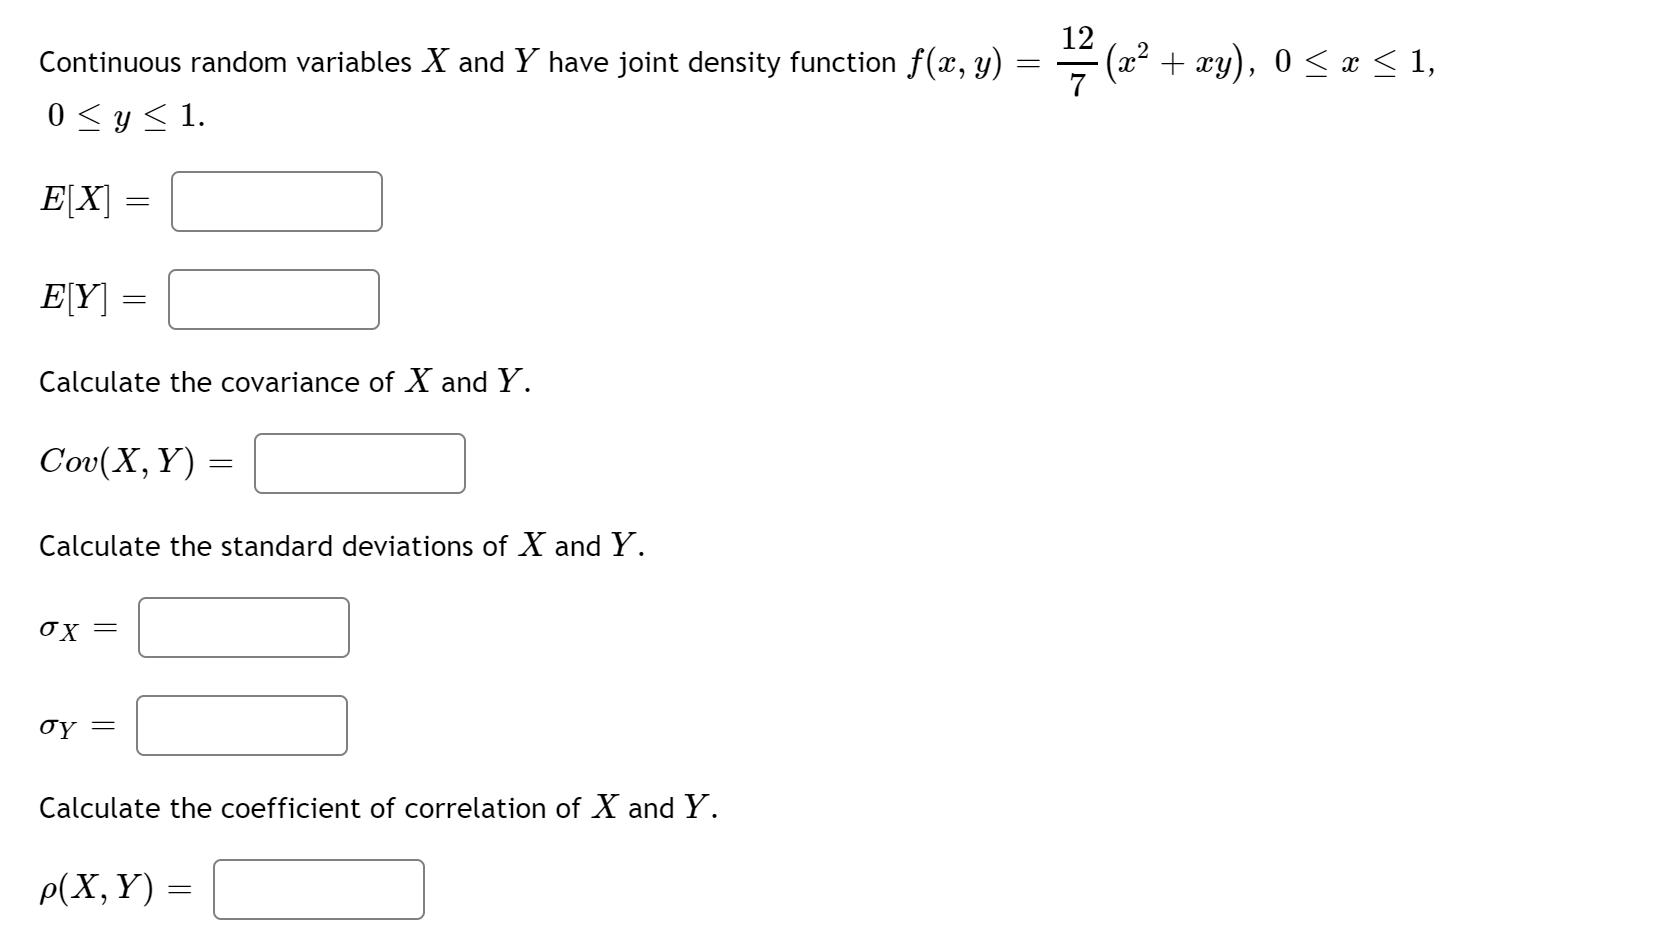 Continuous random variables X and Y have joint density function f(x, y)
12
(x² + xy), 0 < x < 1,
0 <y < 1.
E[X]
E[Y] =
Calculate the covariance of X and Y.
Cov(X, Y) =
